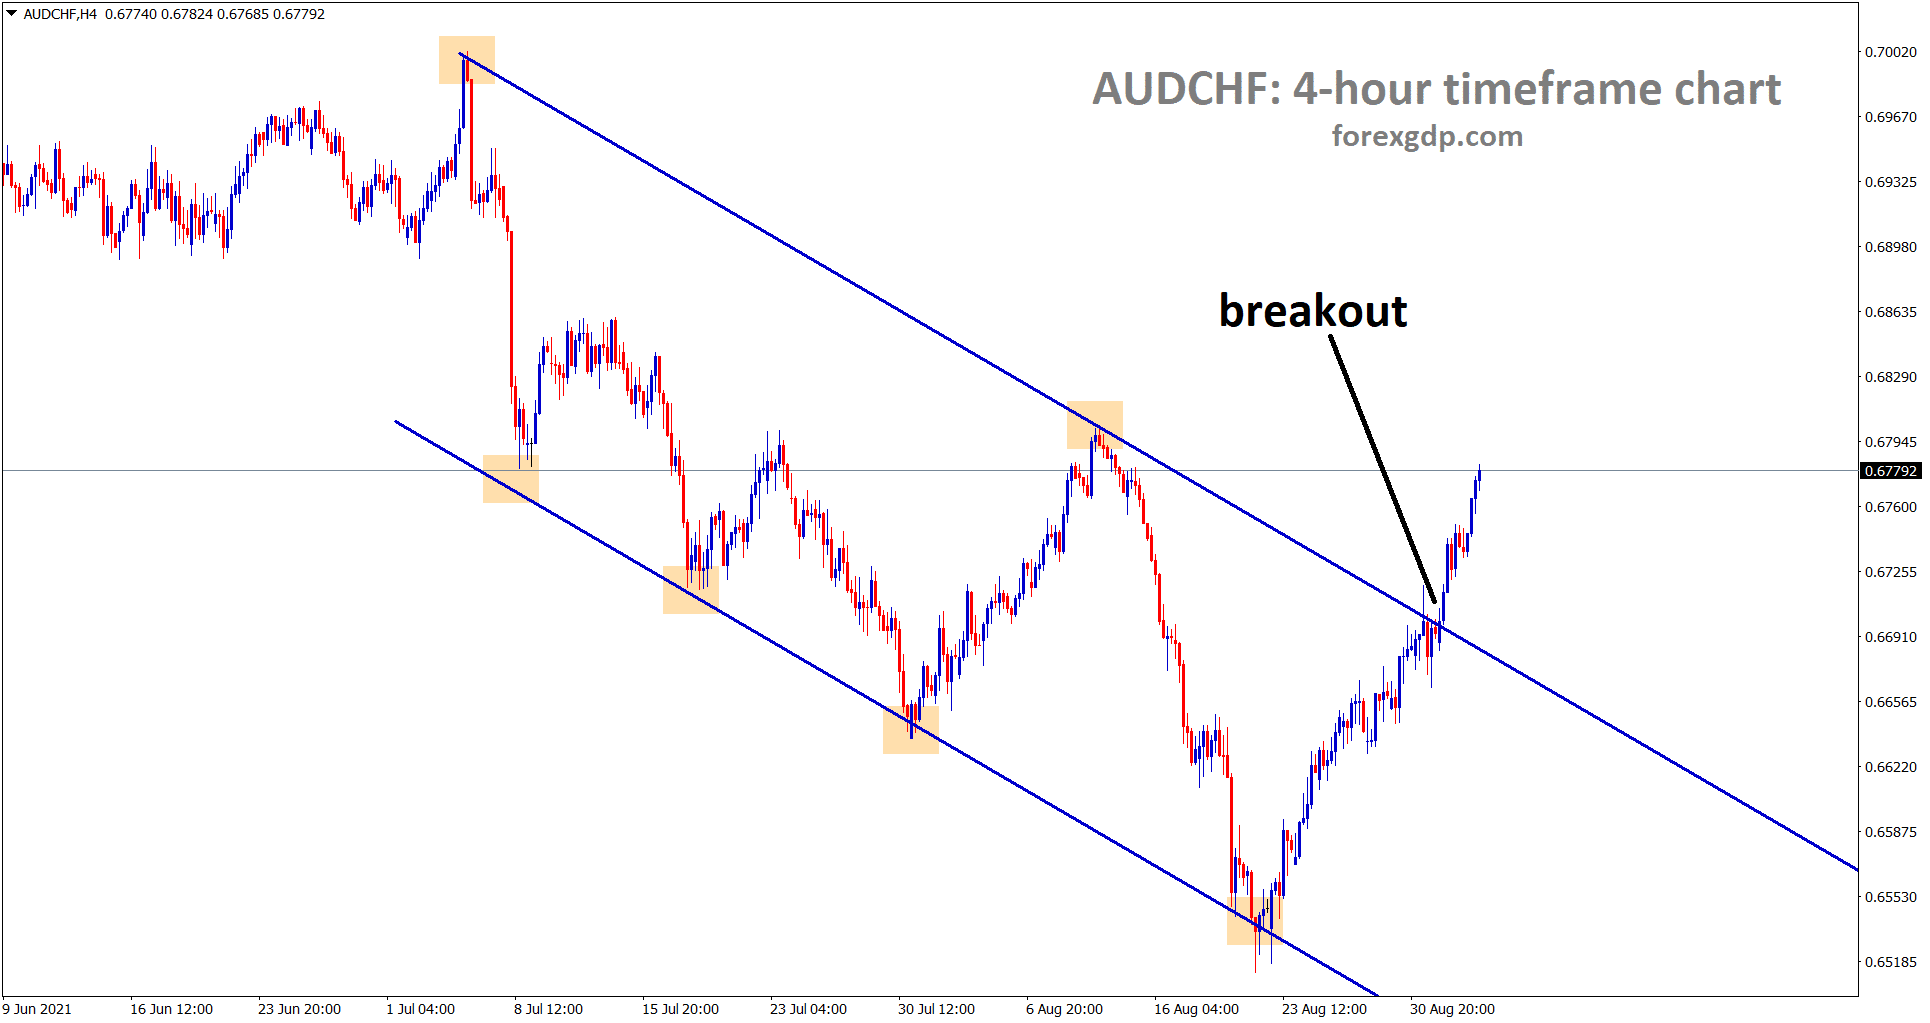 AUDCHF has broken the top of the descending channel and its going to reach the nearest resistance area